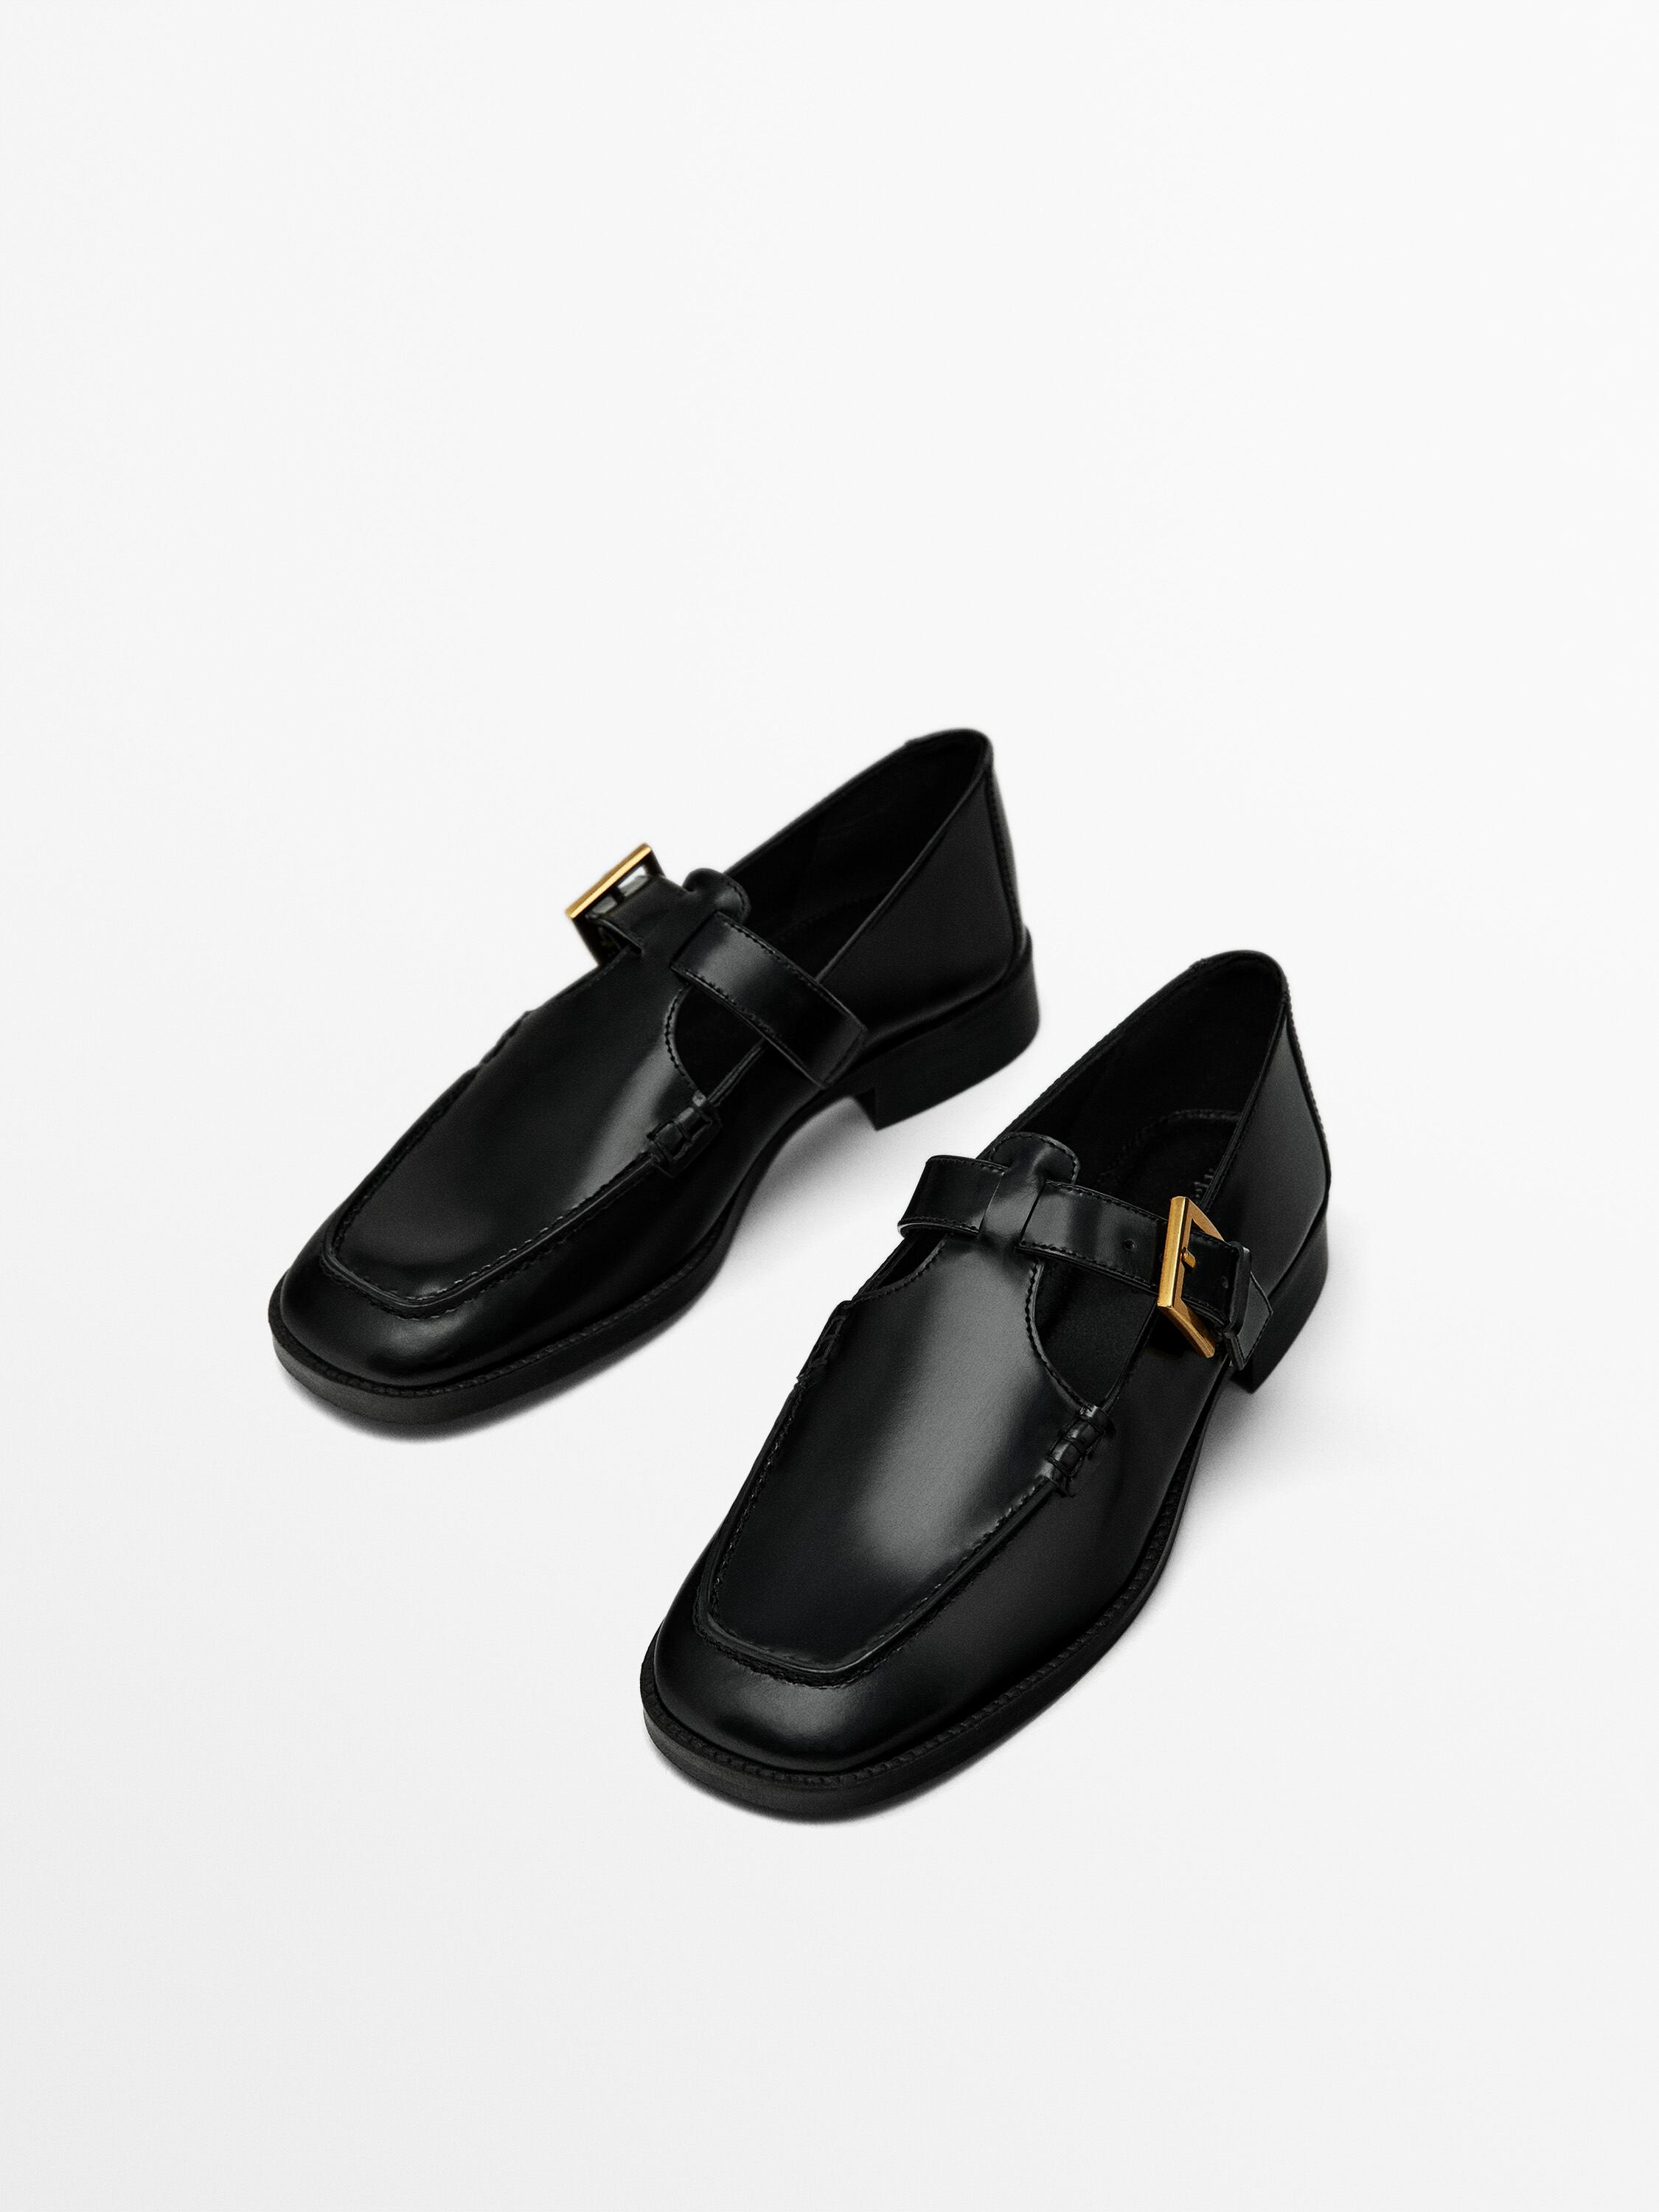 Square-toe buckled loafers